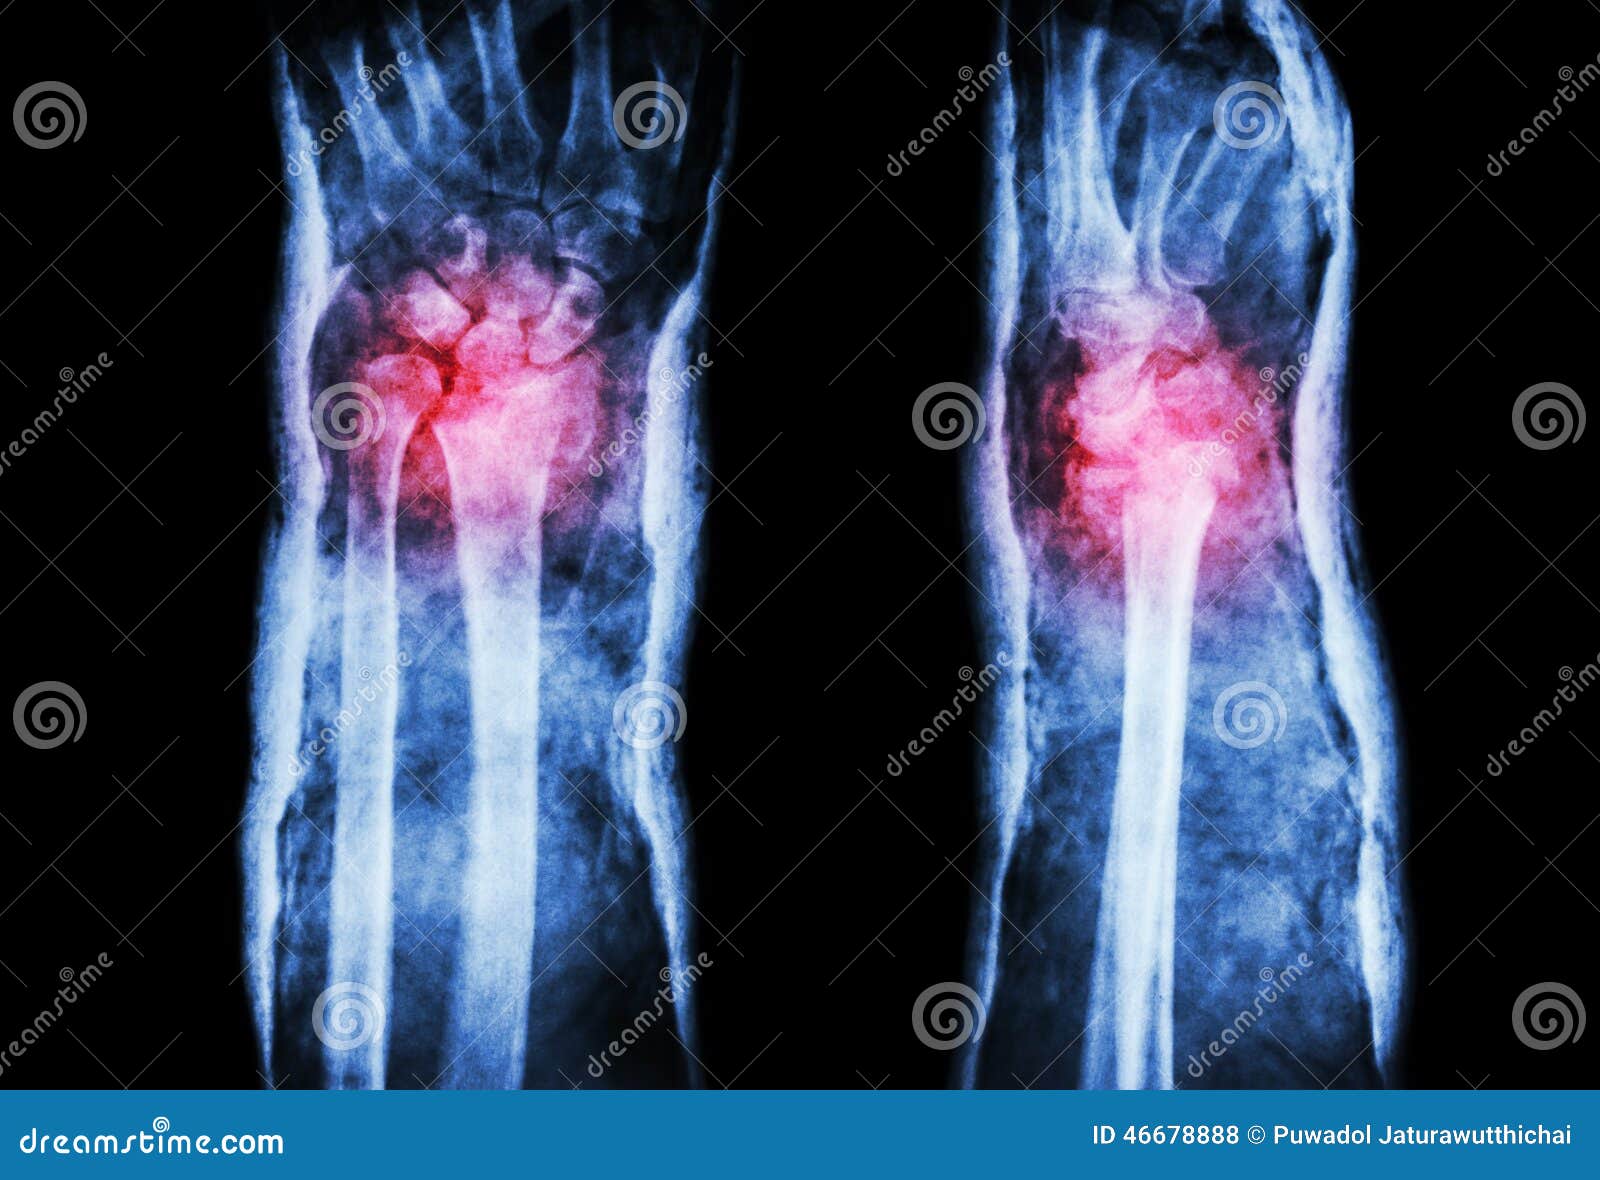 fracture distal radius (colles' fracture) and cast